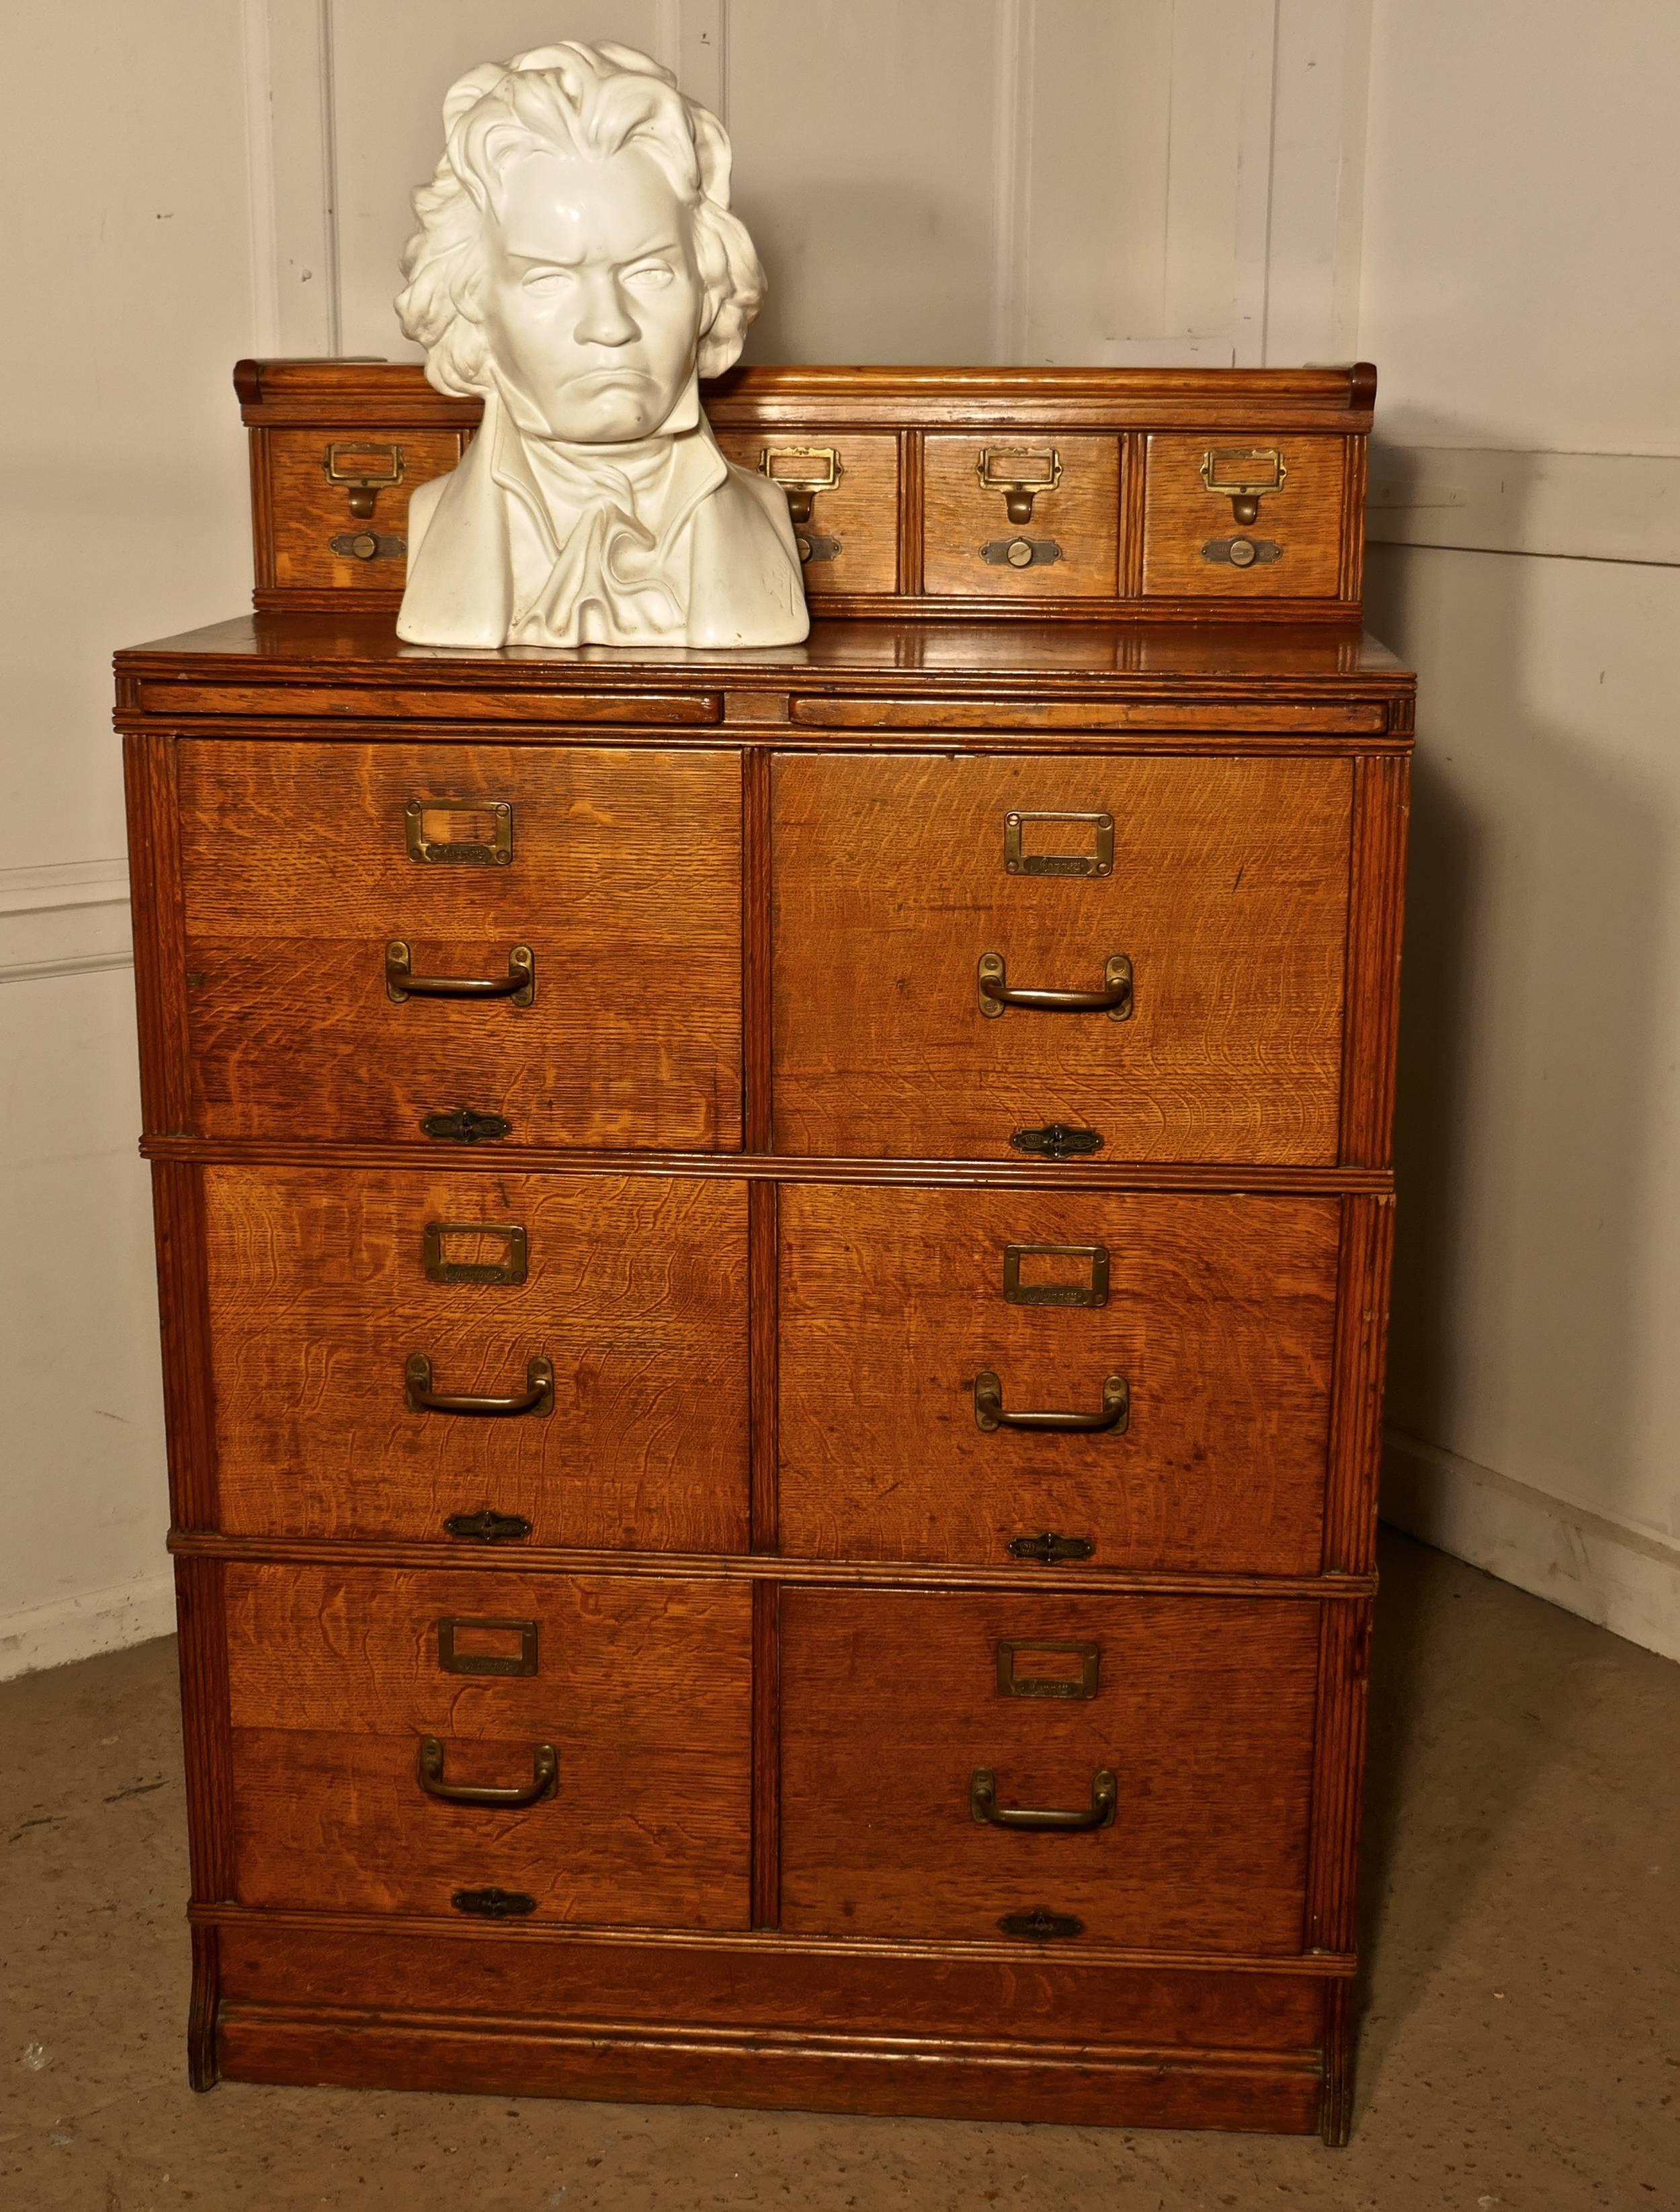 Large Edwardian 11-drawer oak filing cabinet by Shannon

This is an absolute must for every home office or study, it is sectional so no problem with access and all the sections clip together making it very sturdy.
The cabinet is made in golden